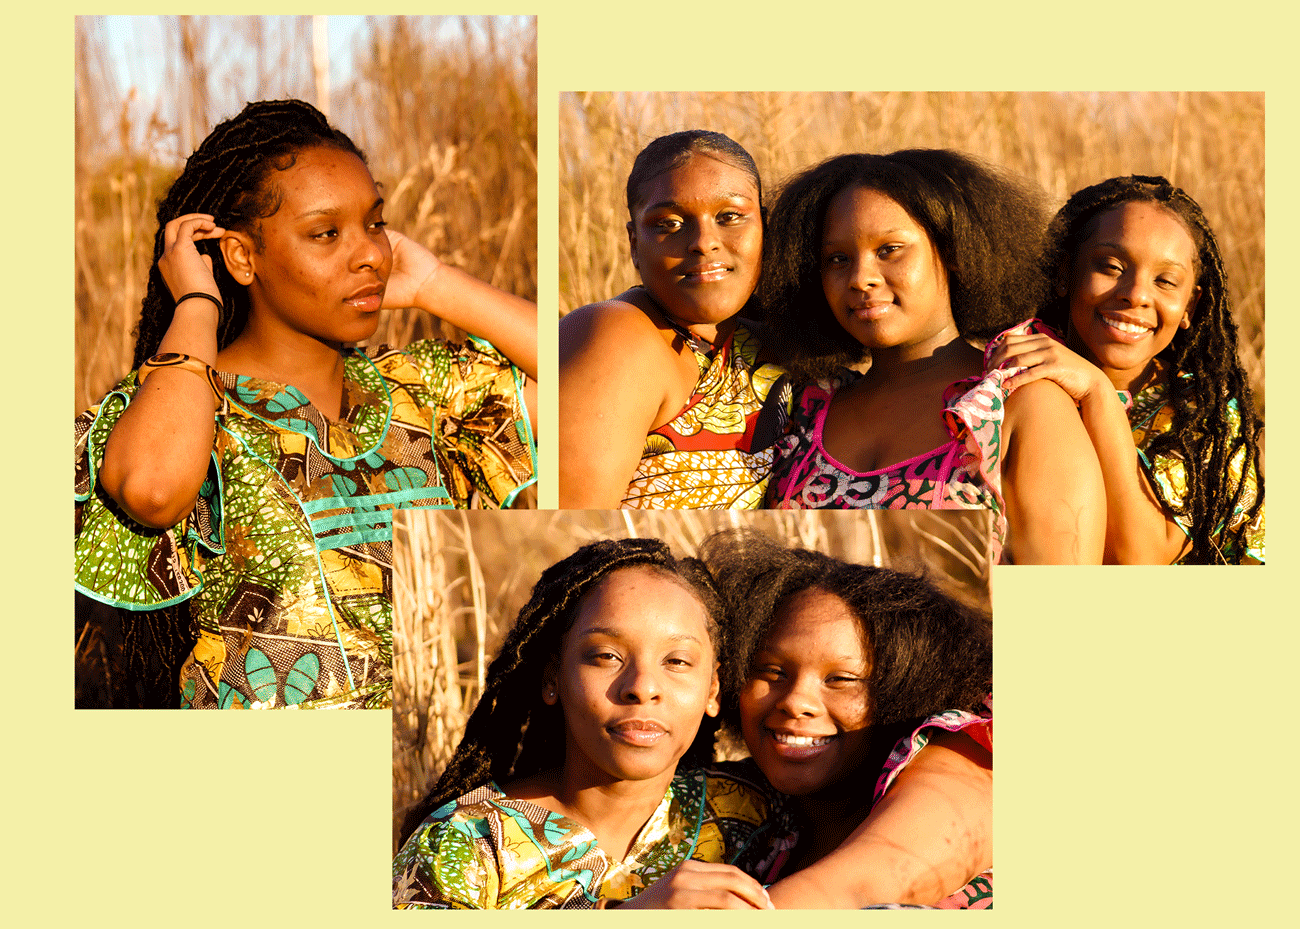 An image of Dasia Bandy and her sisters.